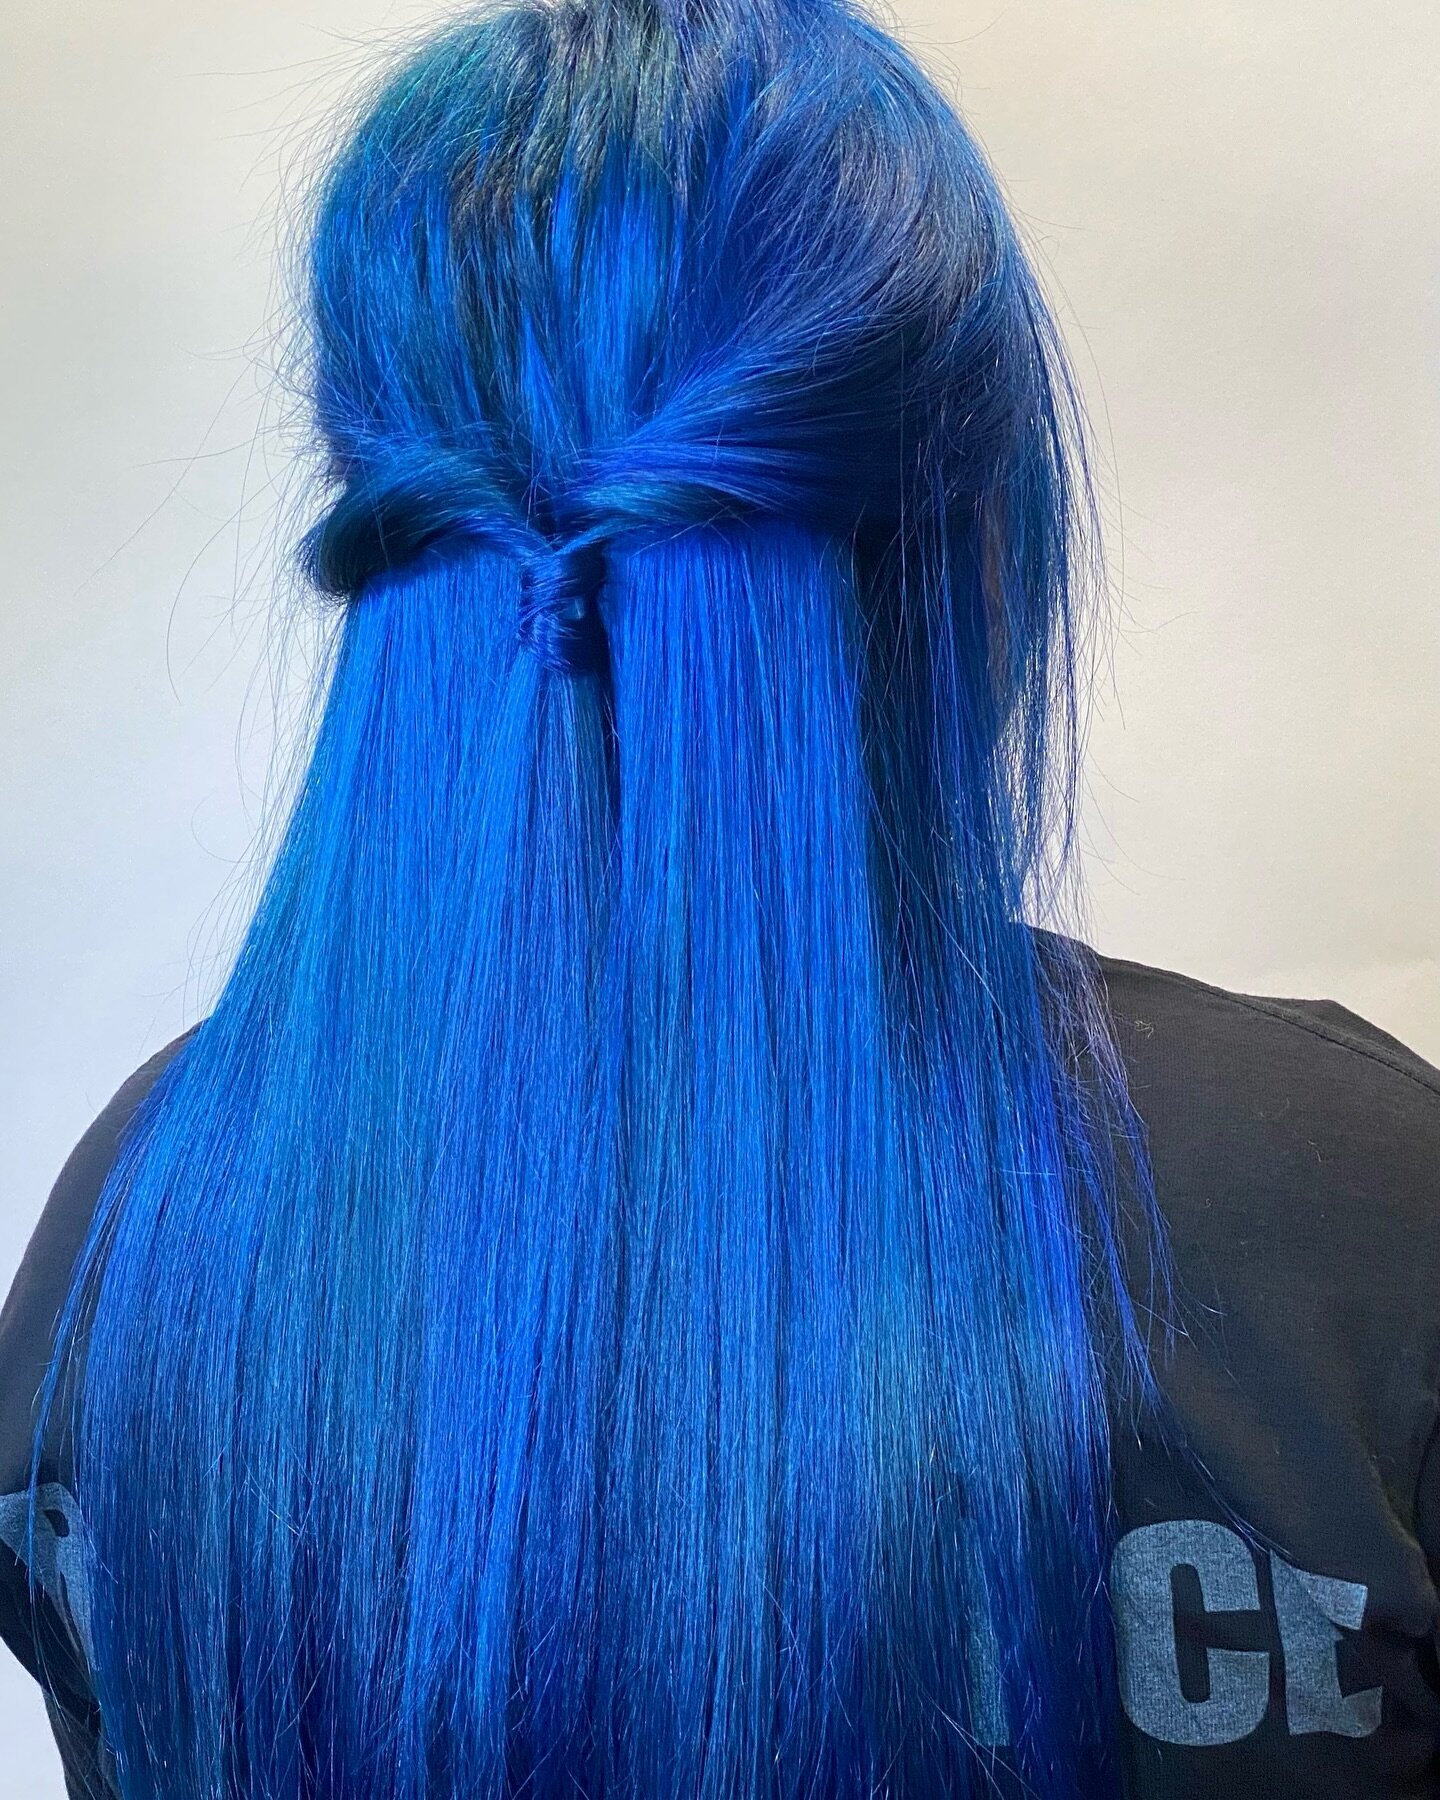 💙The bluiest blue hair to exist in all of Lexington💙
Thank you @jasminemluong for the trust and maintaining your hair at home SO WELL my co-workers wondered what you were doing at the salon! 

#bluehair #pulpriot #pulpriothair #mermaidhair #unicorn